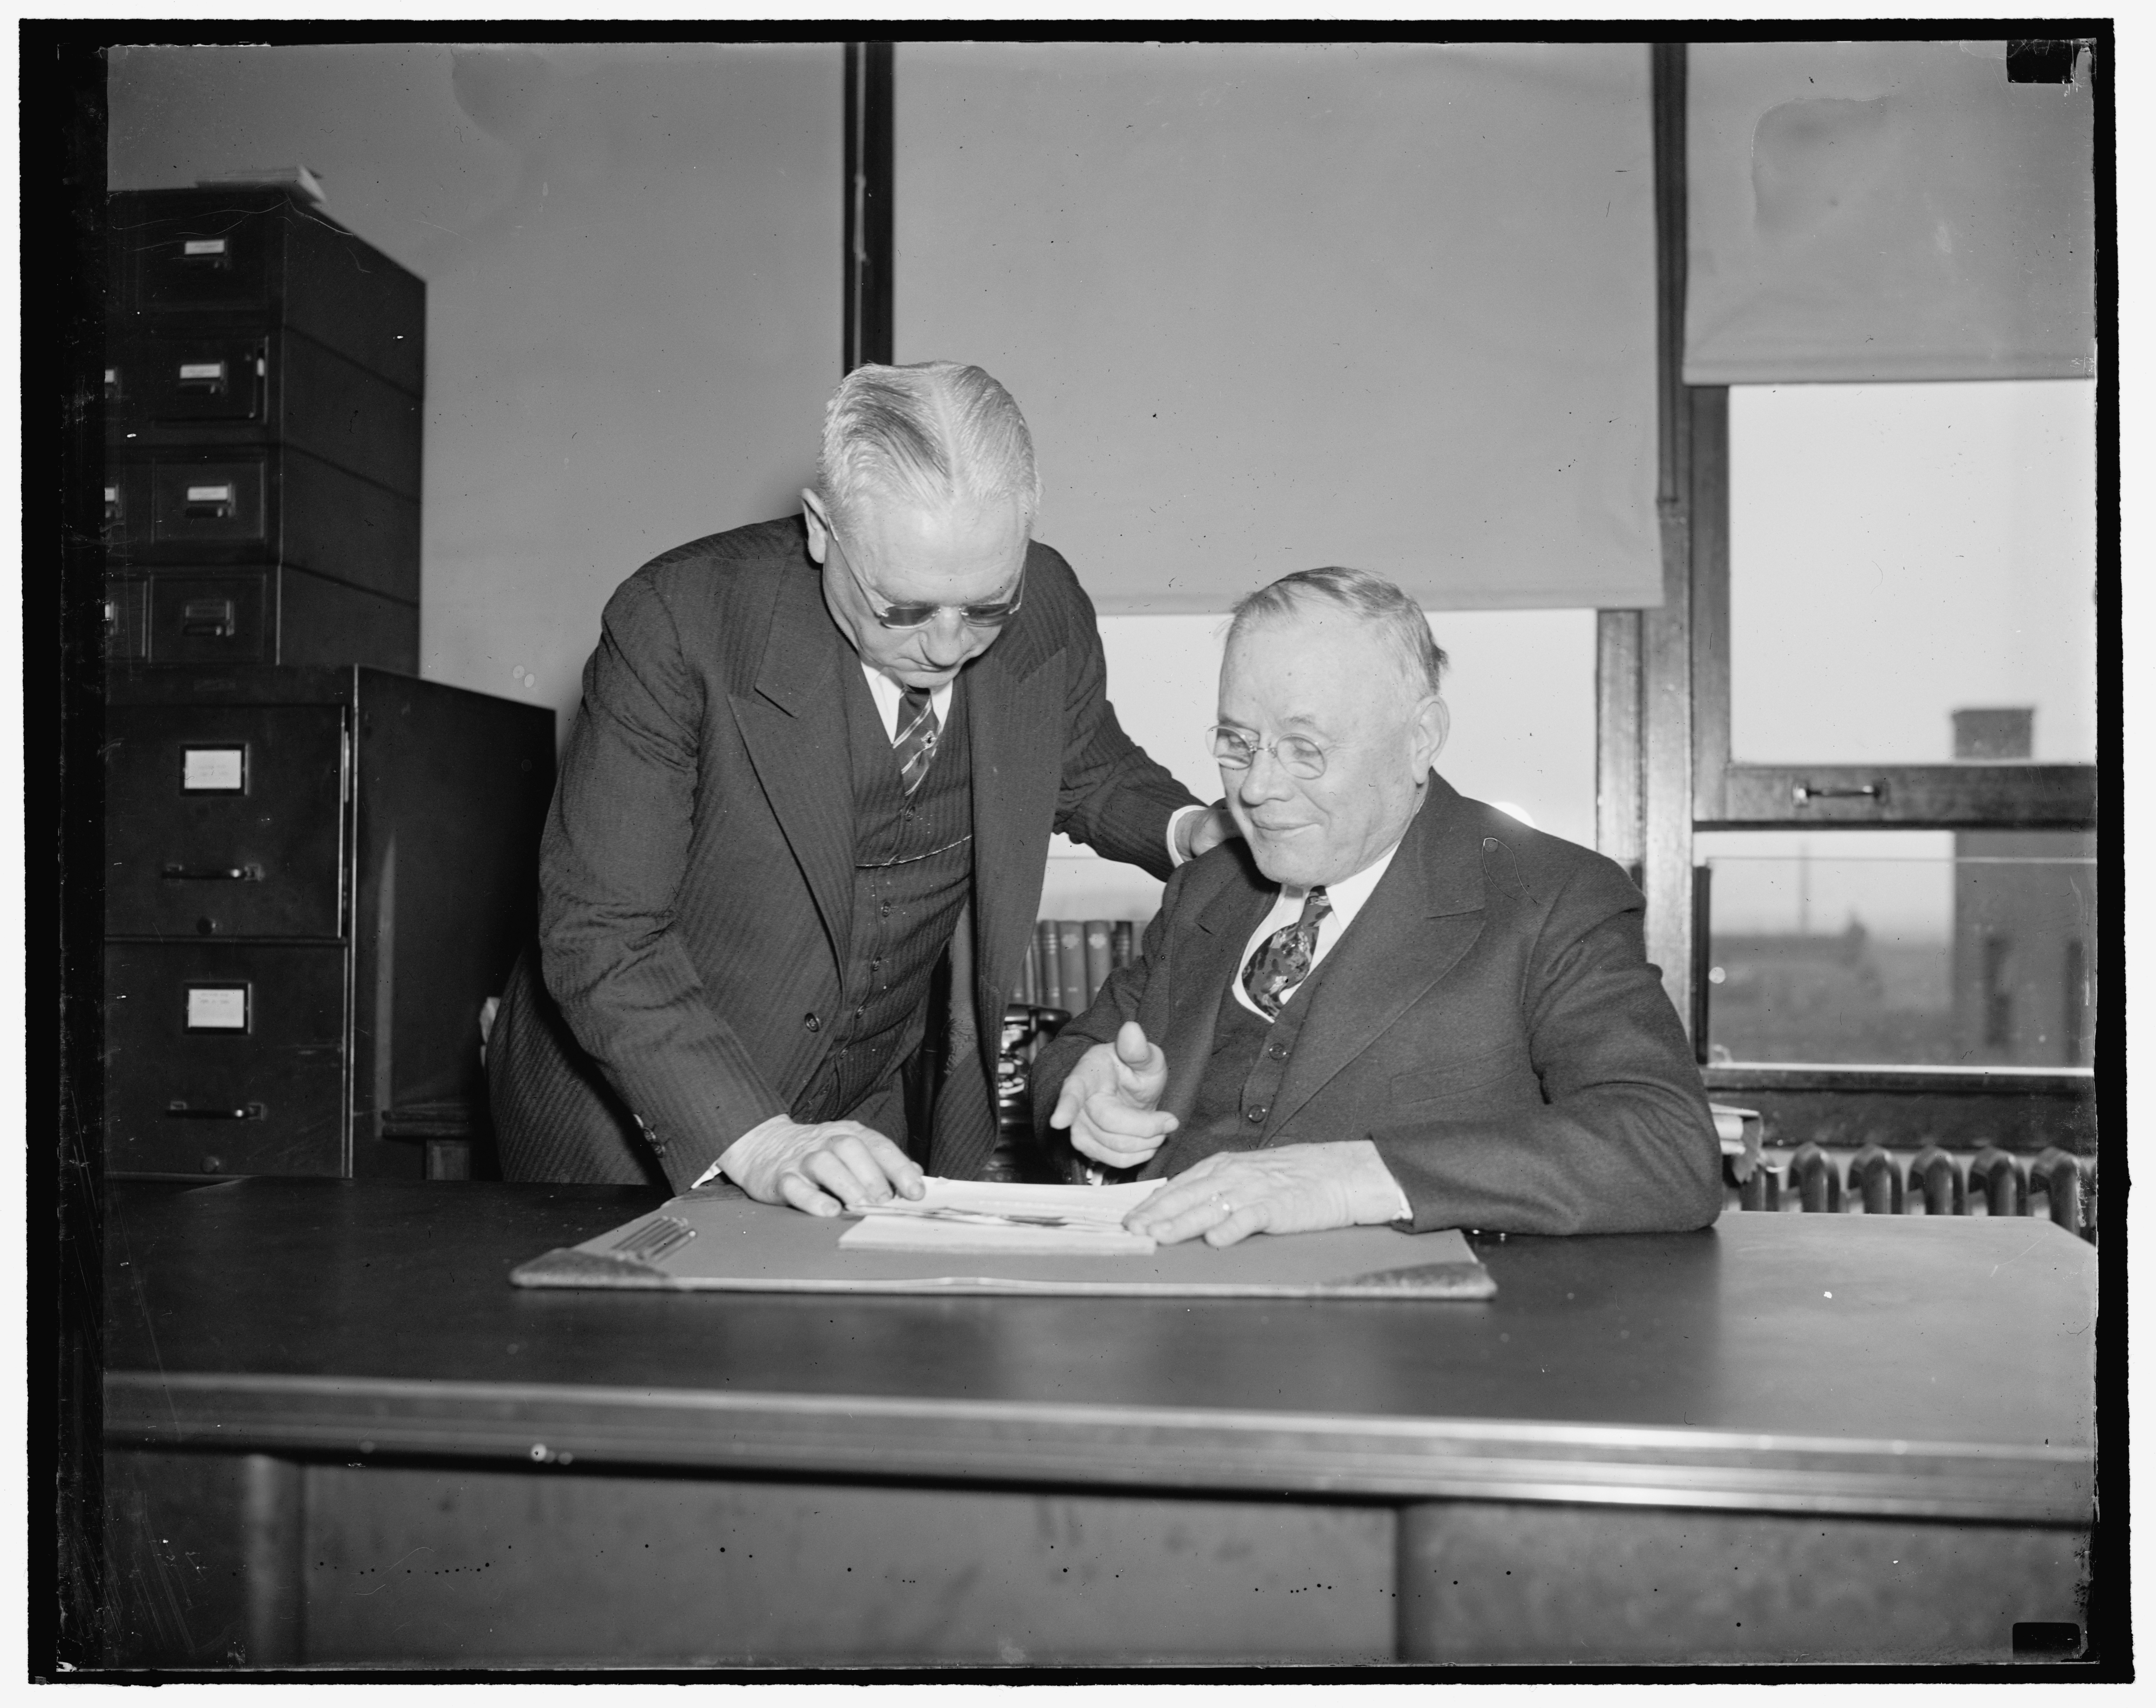 Two men are at a desk looking over paperwork.